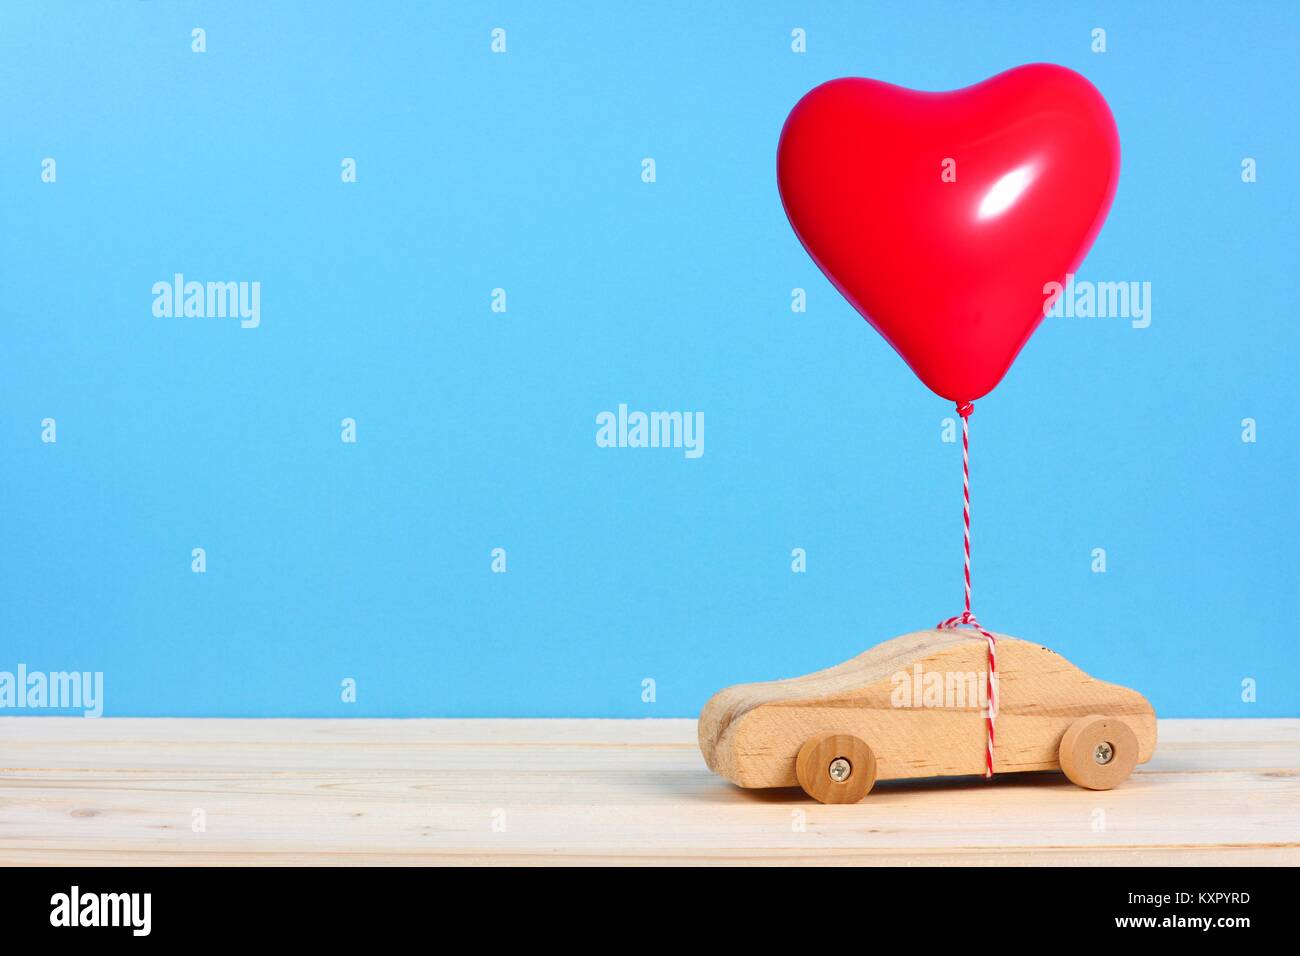 Wooden toy car with a red heart balloon against a blue background. Valentines Day or love concept. Stock Photo